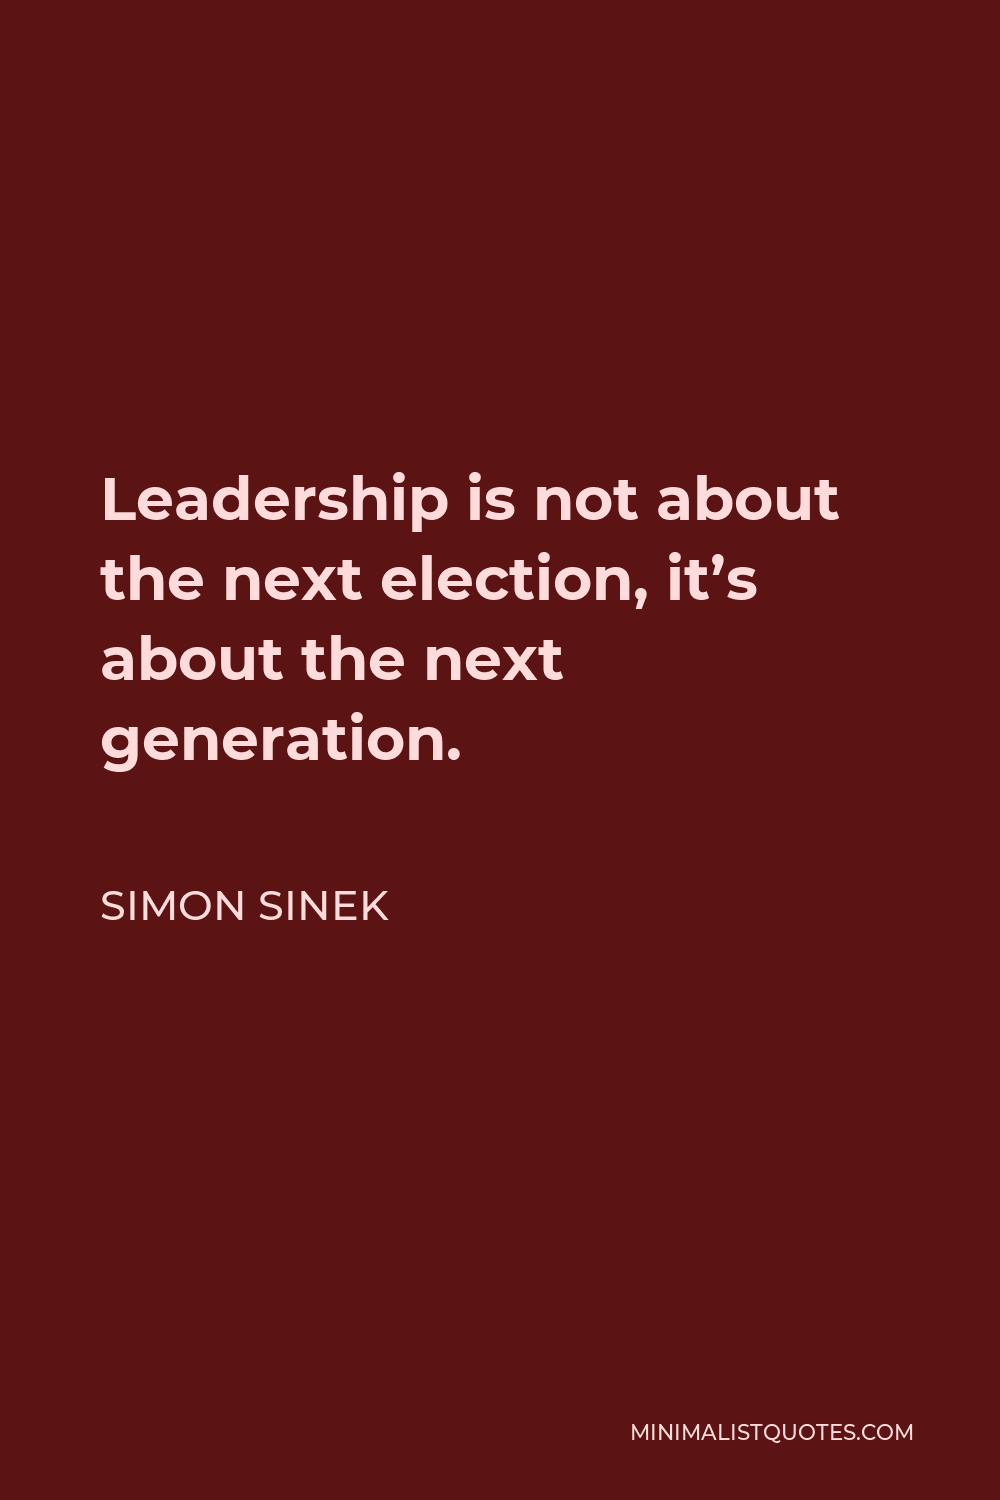 Simon Sinek Quote - Leadership is not about the next election, it’s about the next generation.